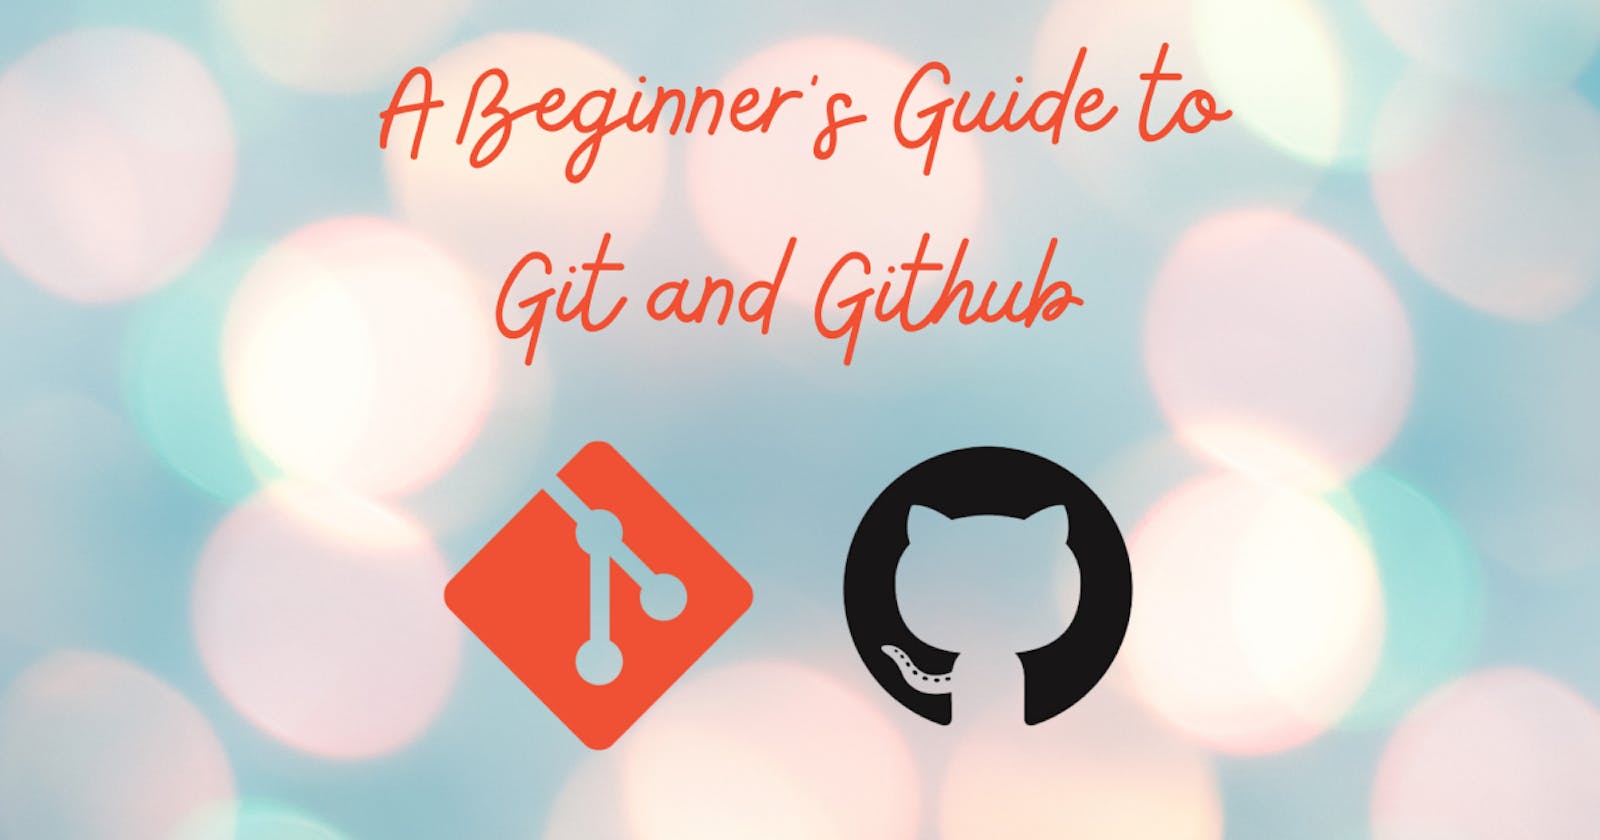 A Beginner's Guide to Git and Github